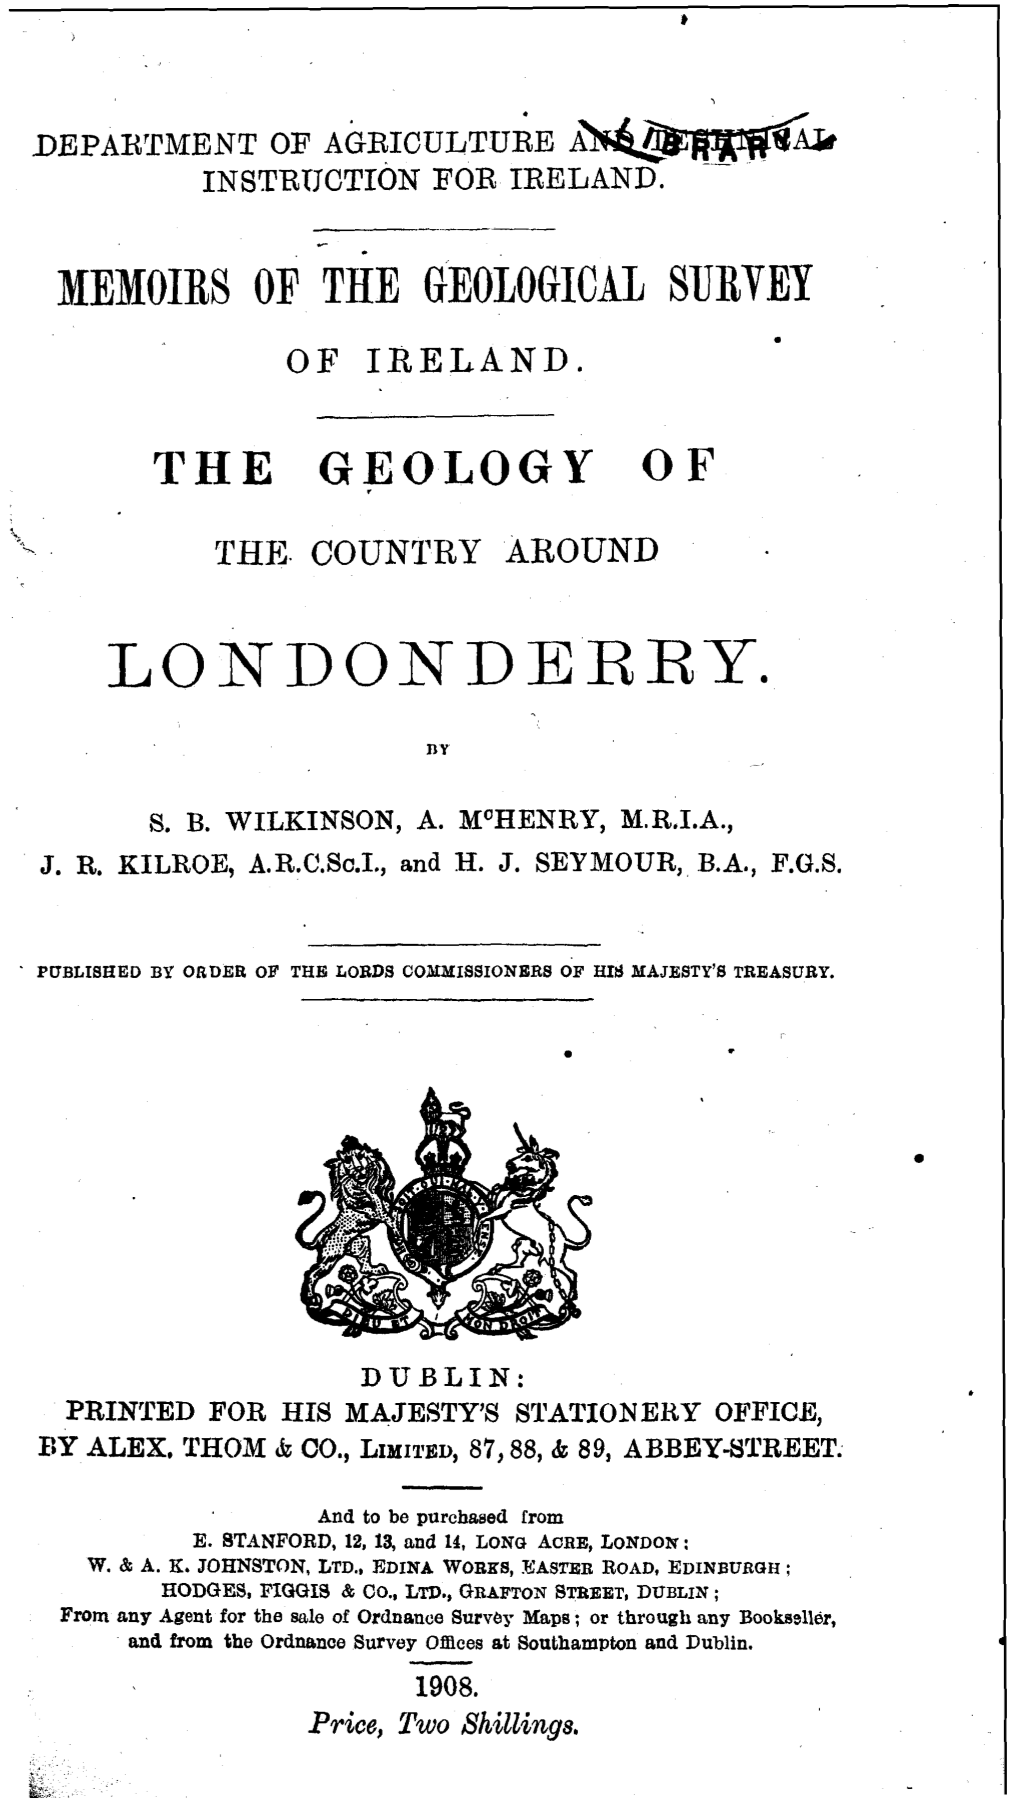 The Geology of the Country Around Londonderry